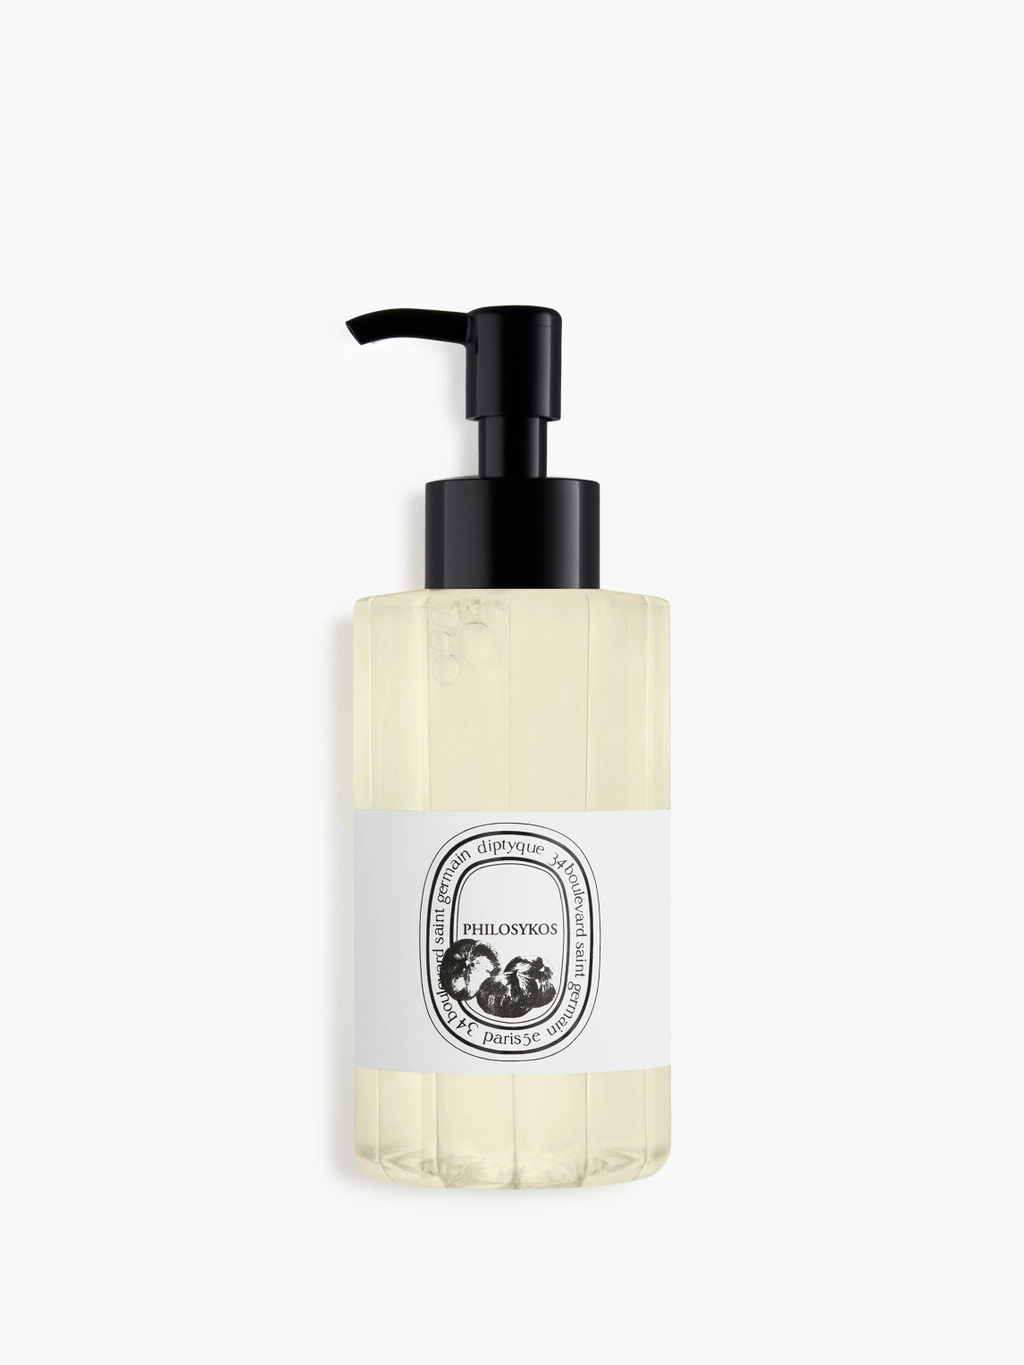 Philosykos Scented cleansing hand and body gel | Diptyque Paris